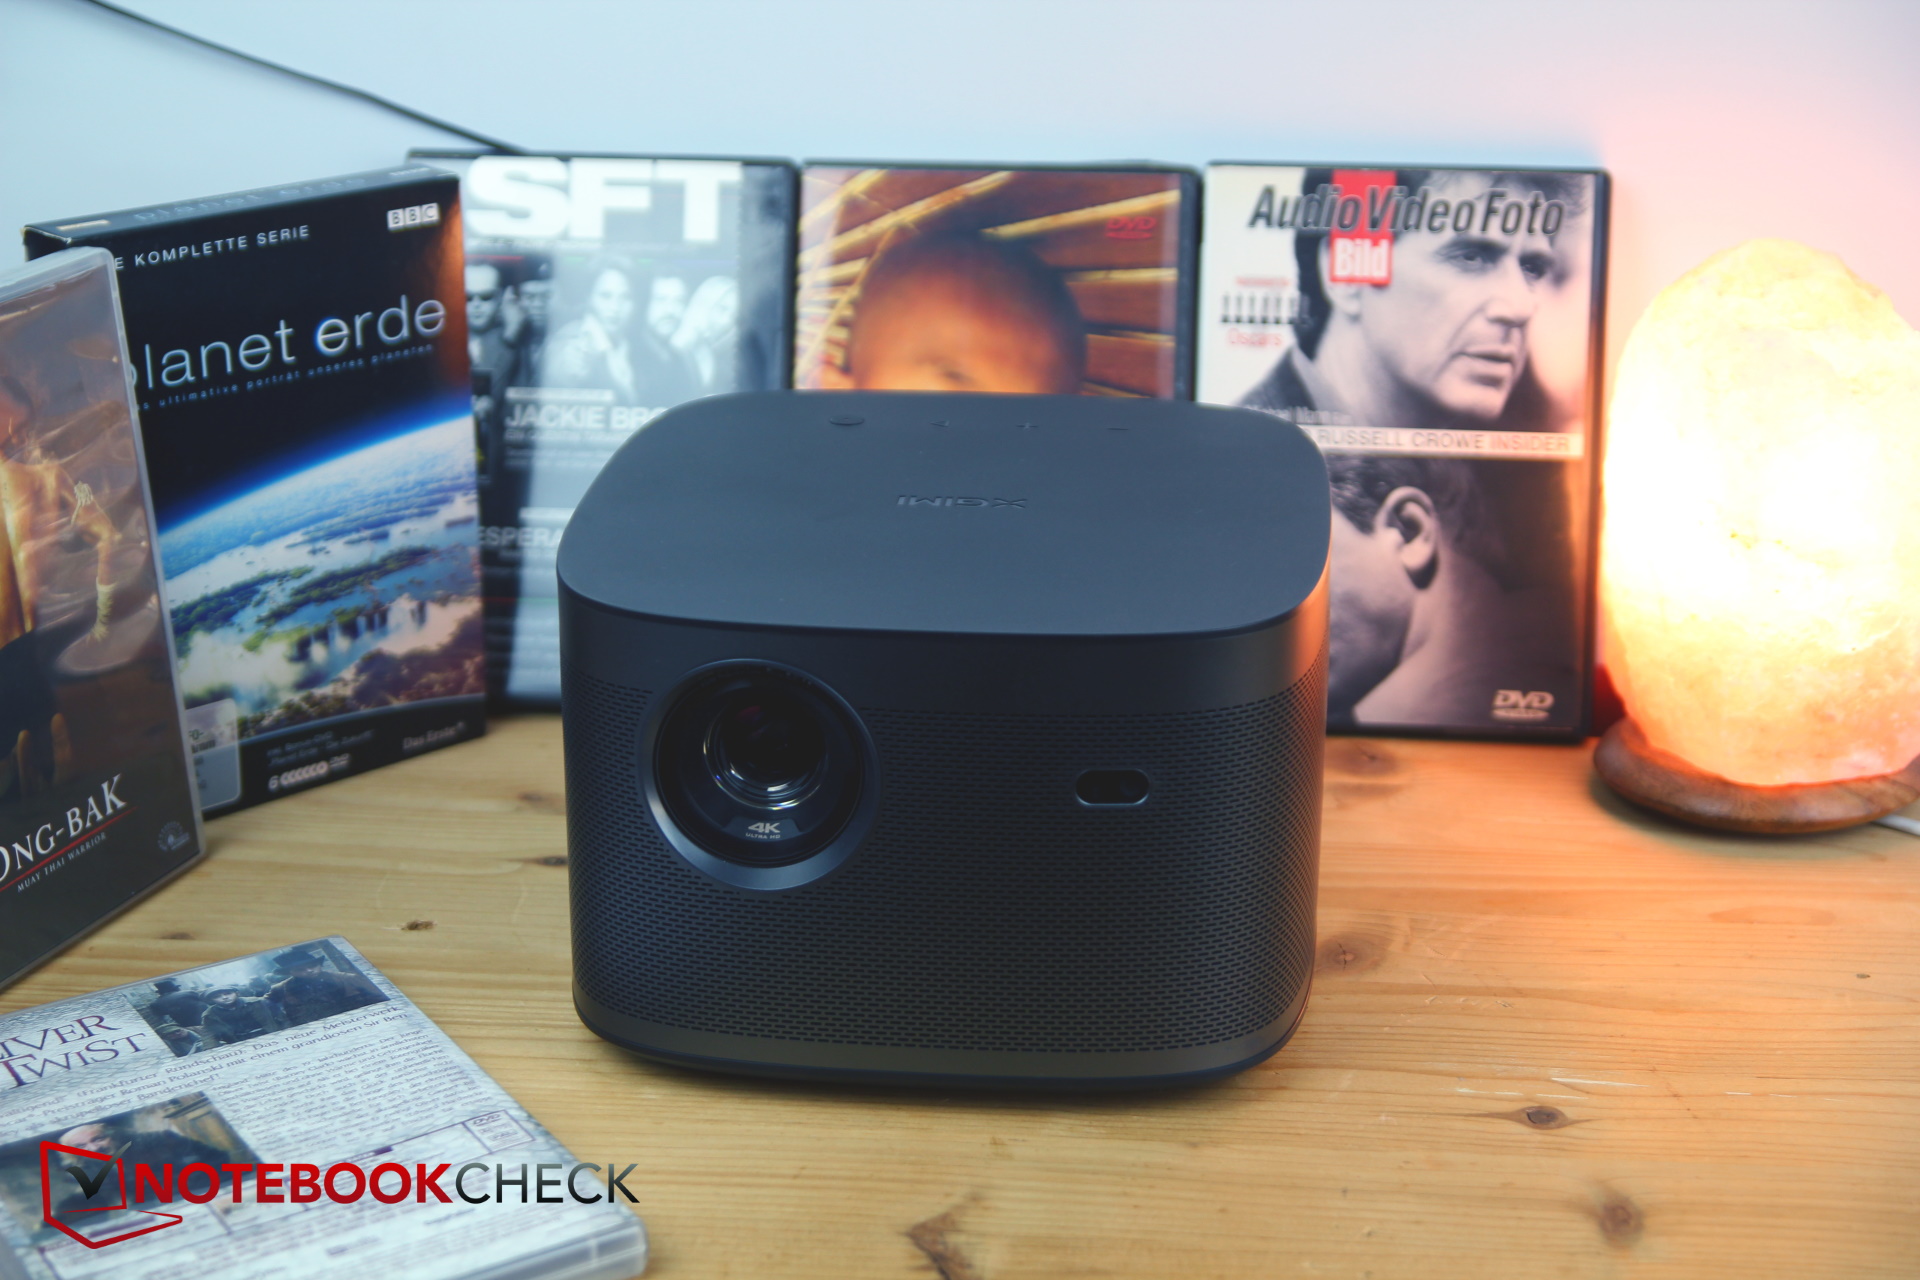 Xgimi Horizon Pro 4K projector review: Beautiful new world -   Reviews